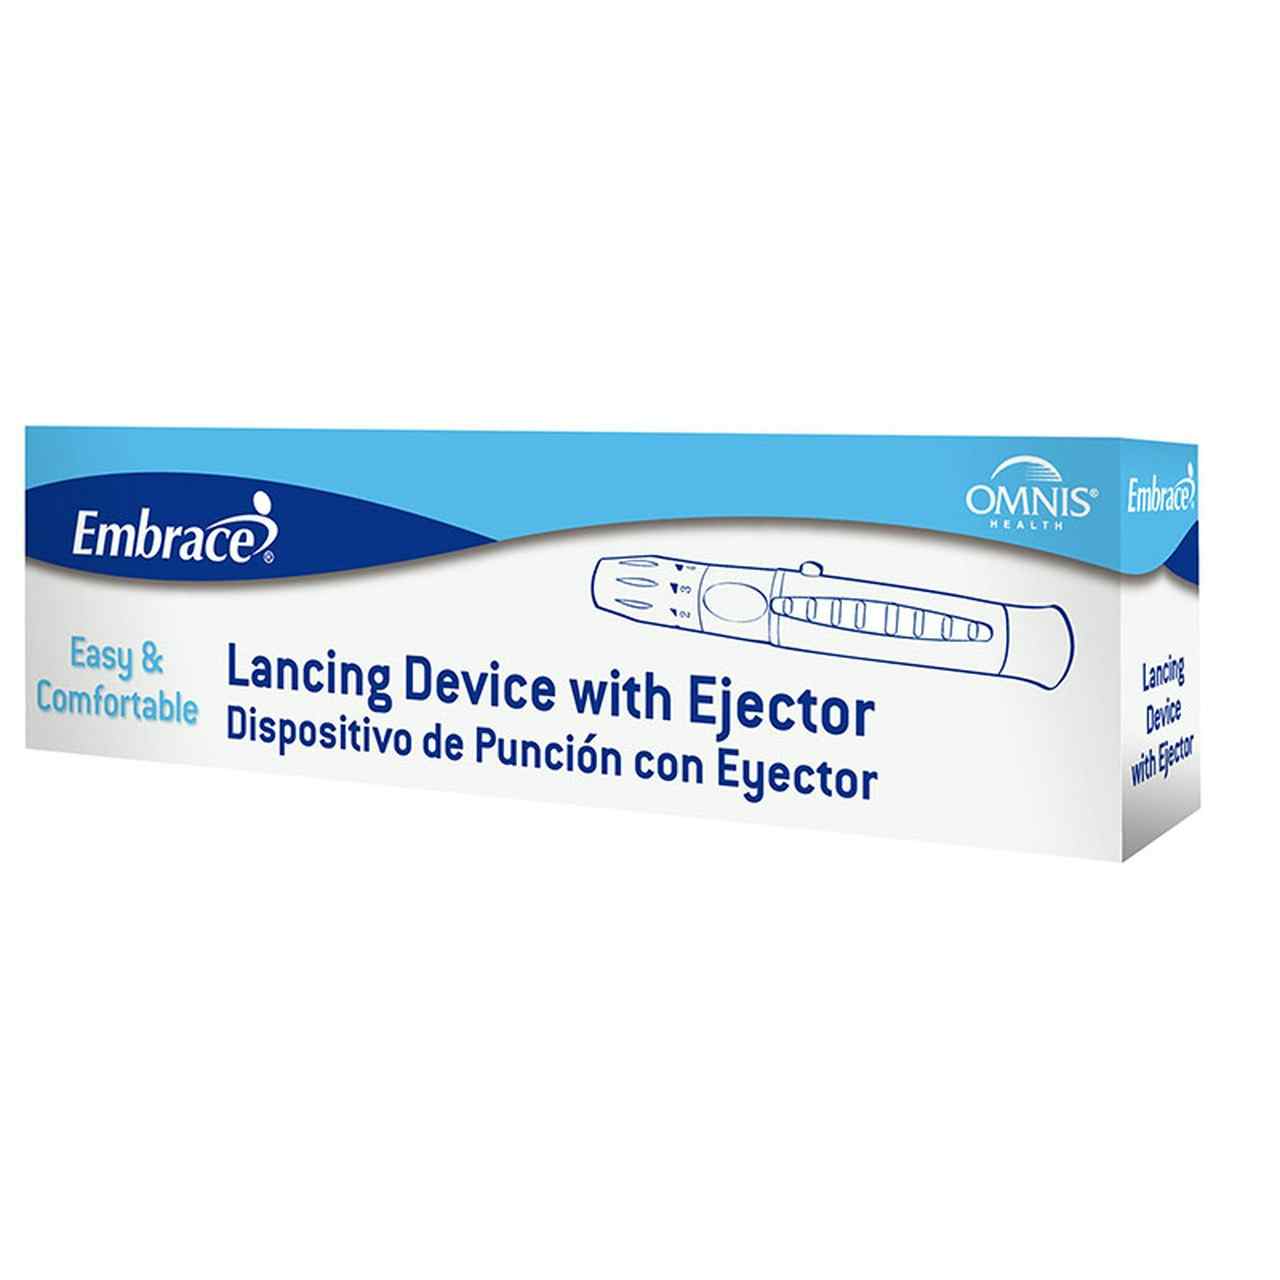 Embrace Lancing Device with Ejector, APX02AB0122, 1 Box